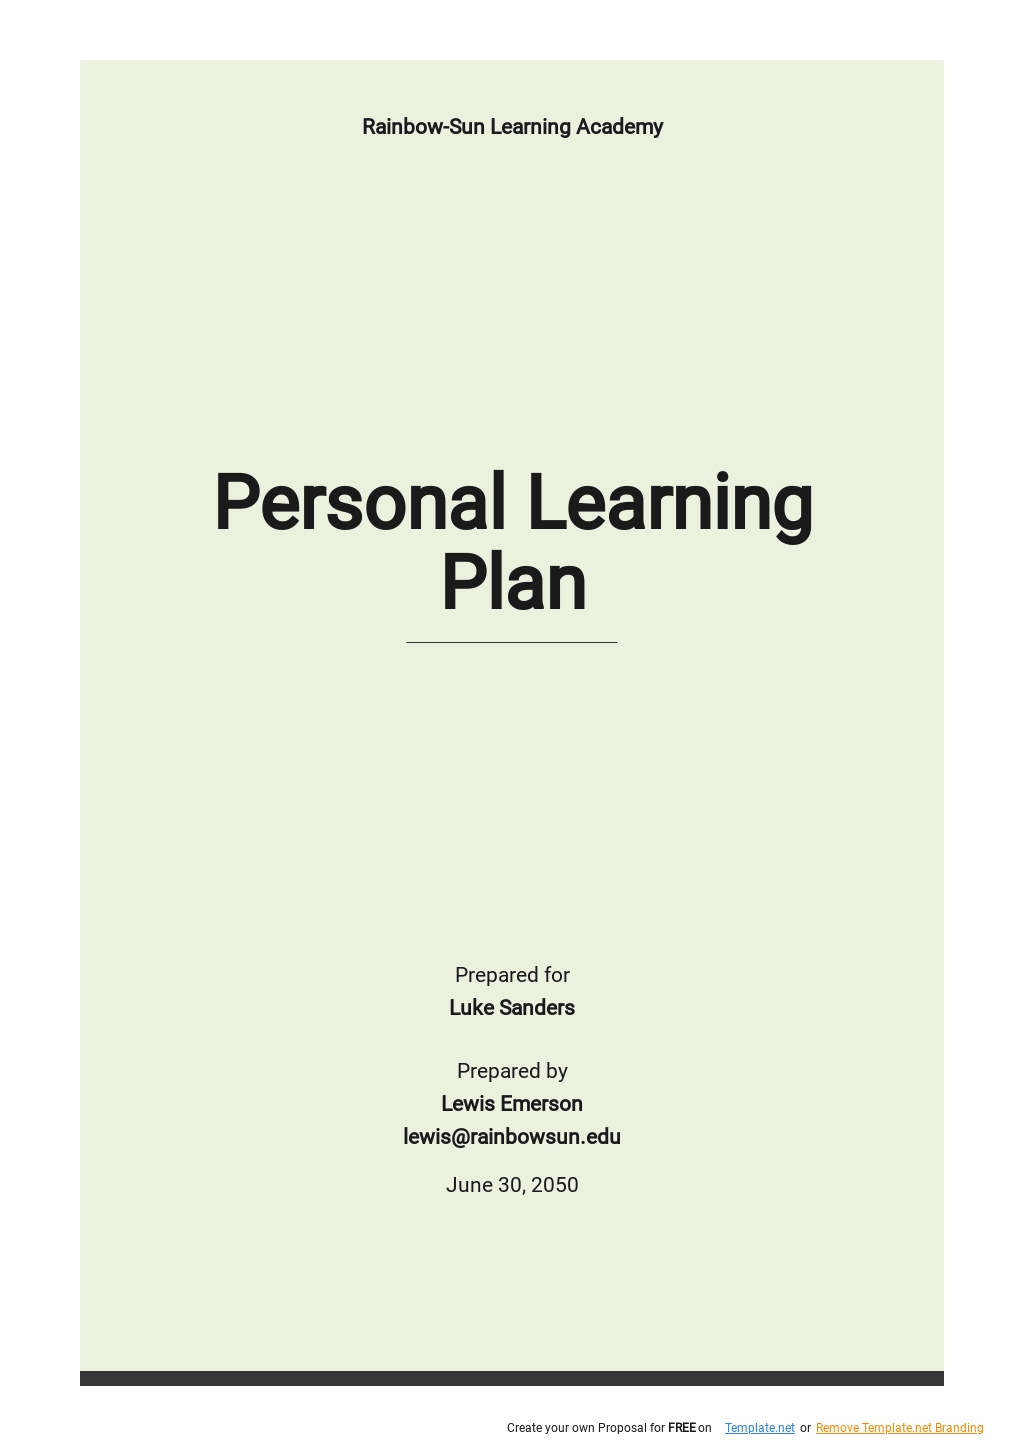 Personal Learning Plan Template.jpe